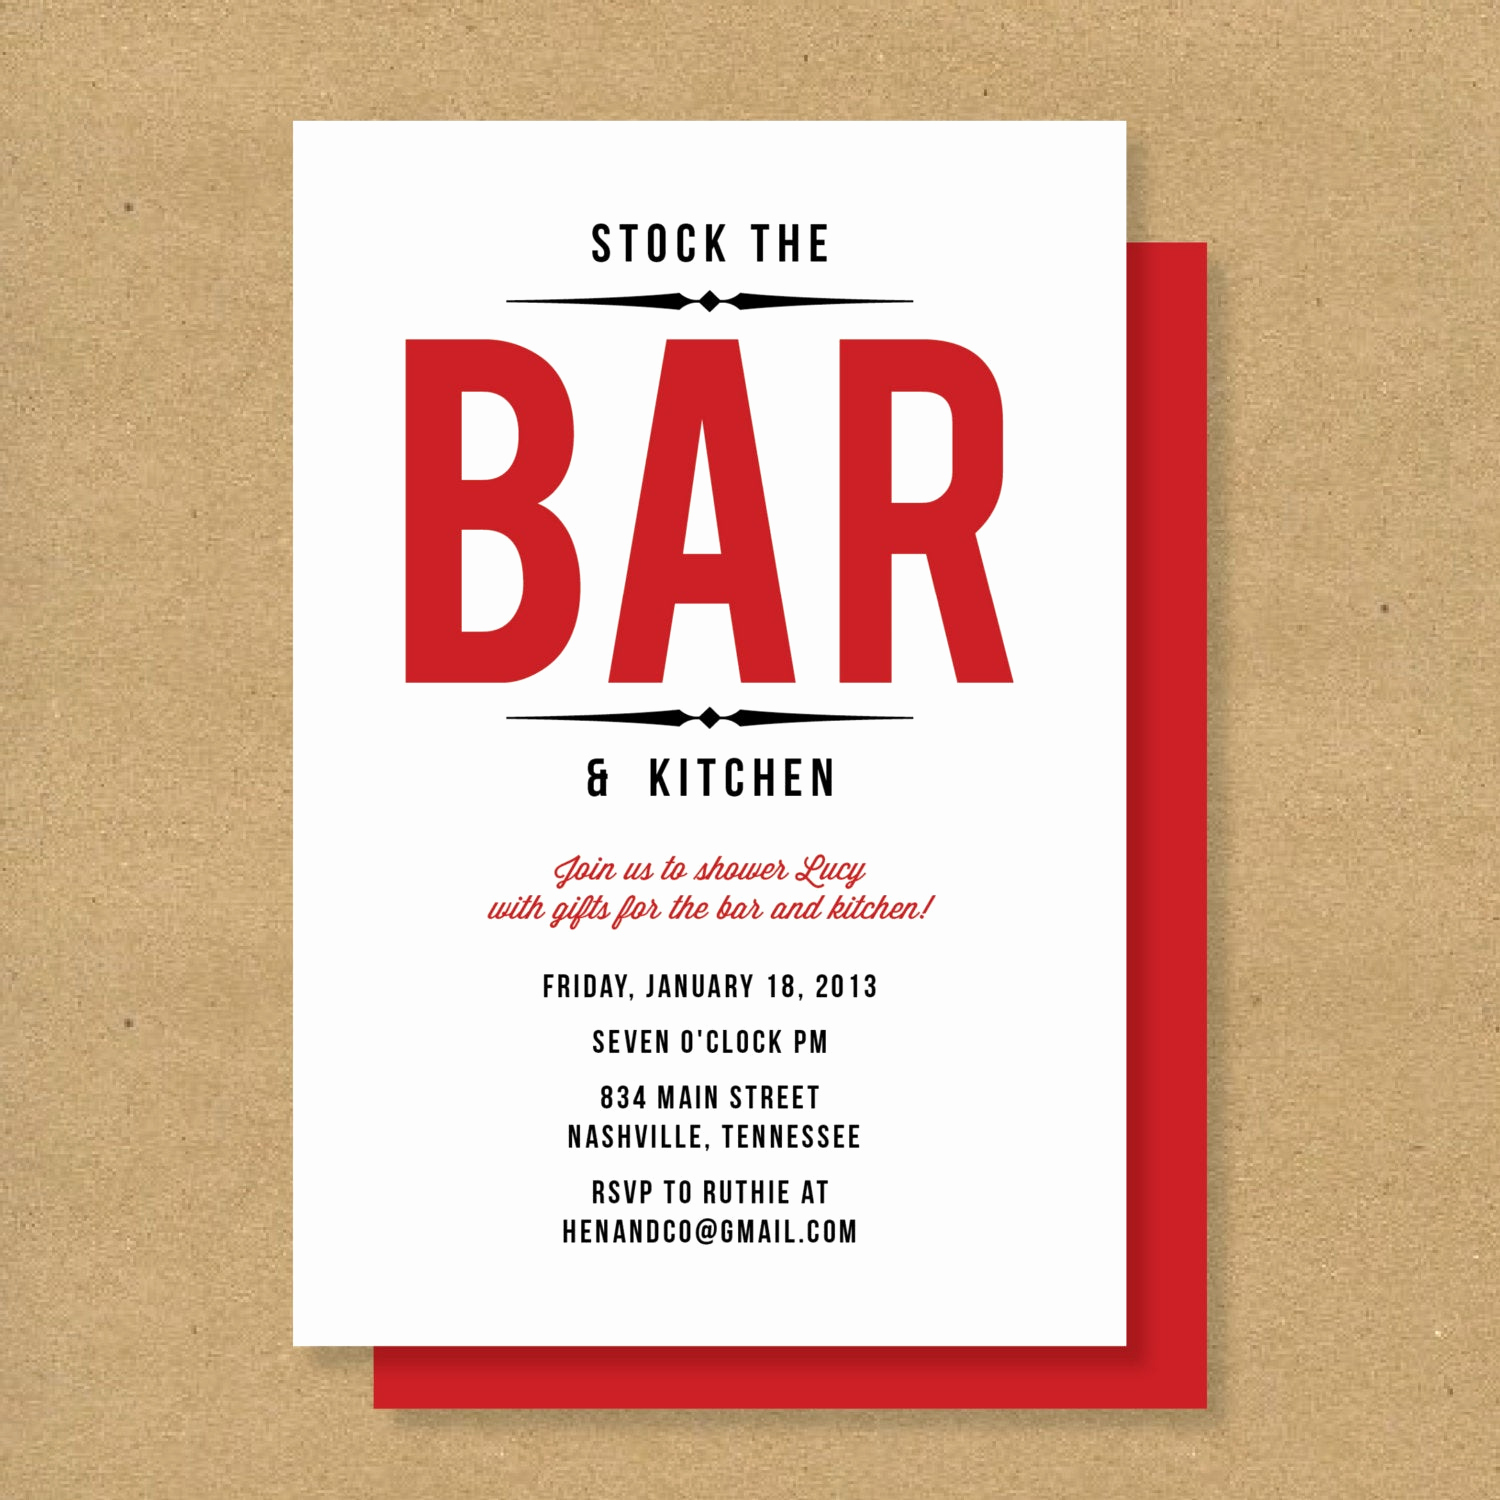 Stock the Bar Invitation Wording Awesome Bridal Shower Invitation Stock the Bar Kitchen by Henandco